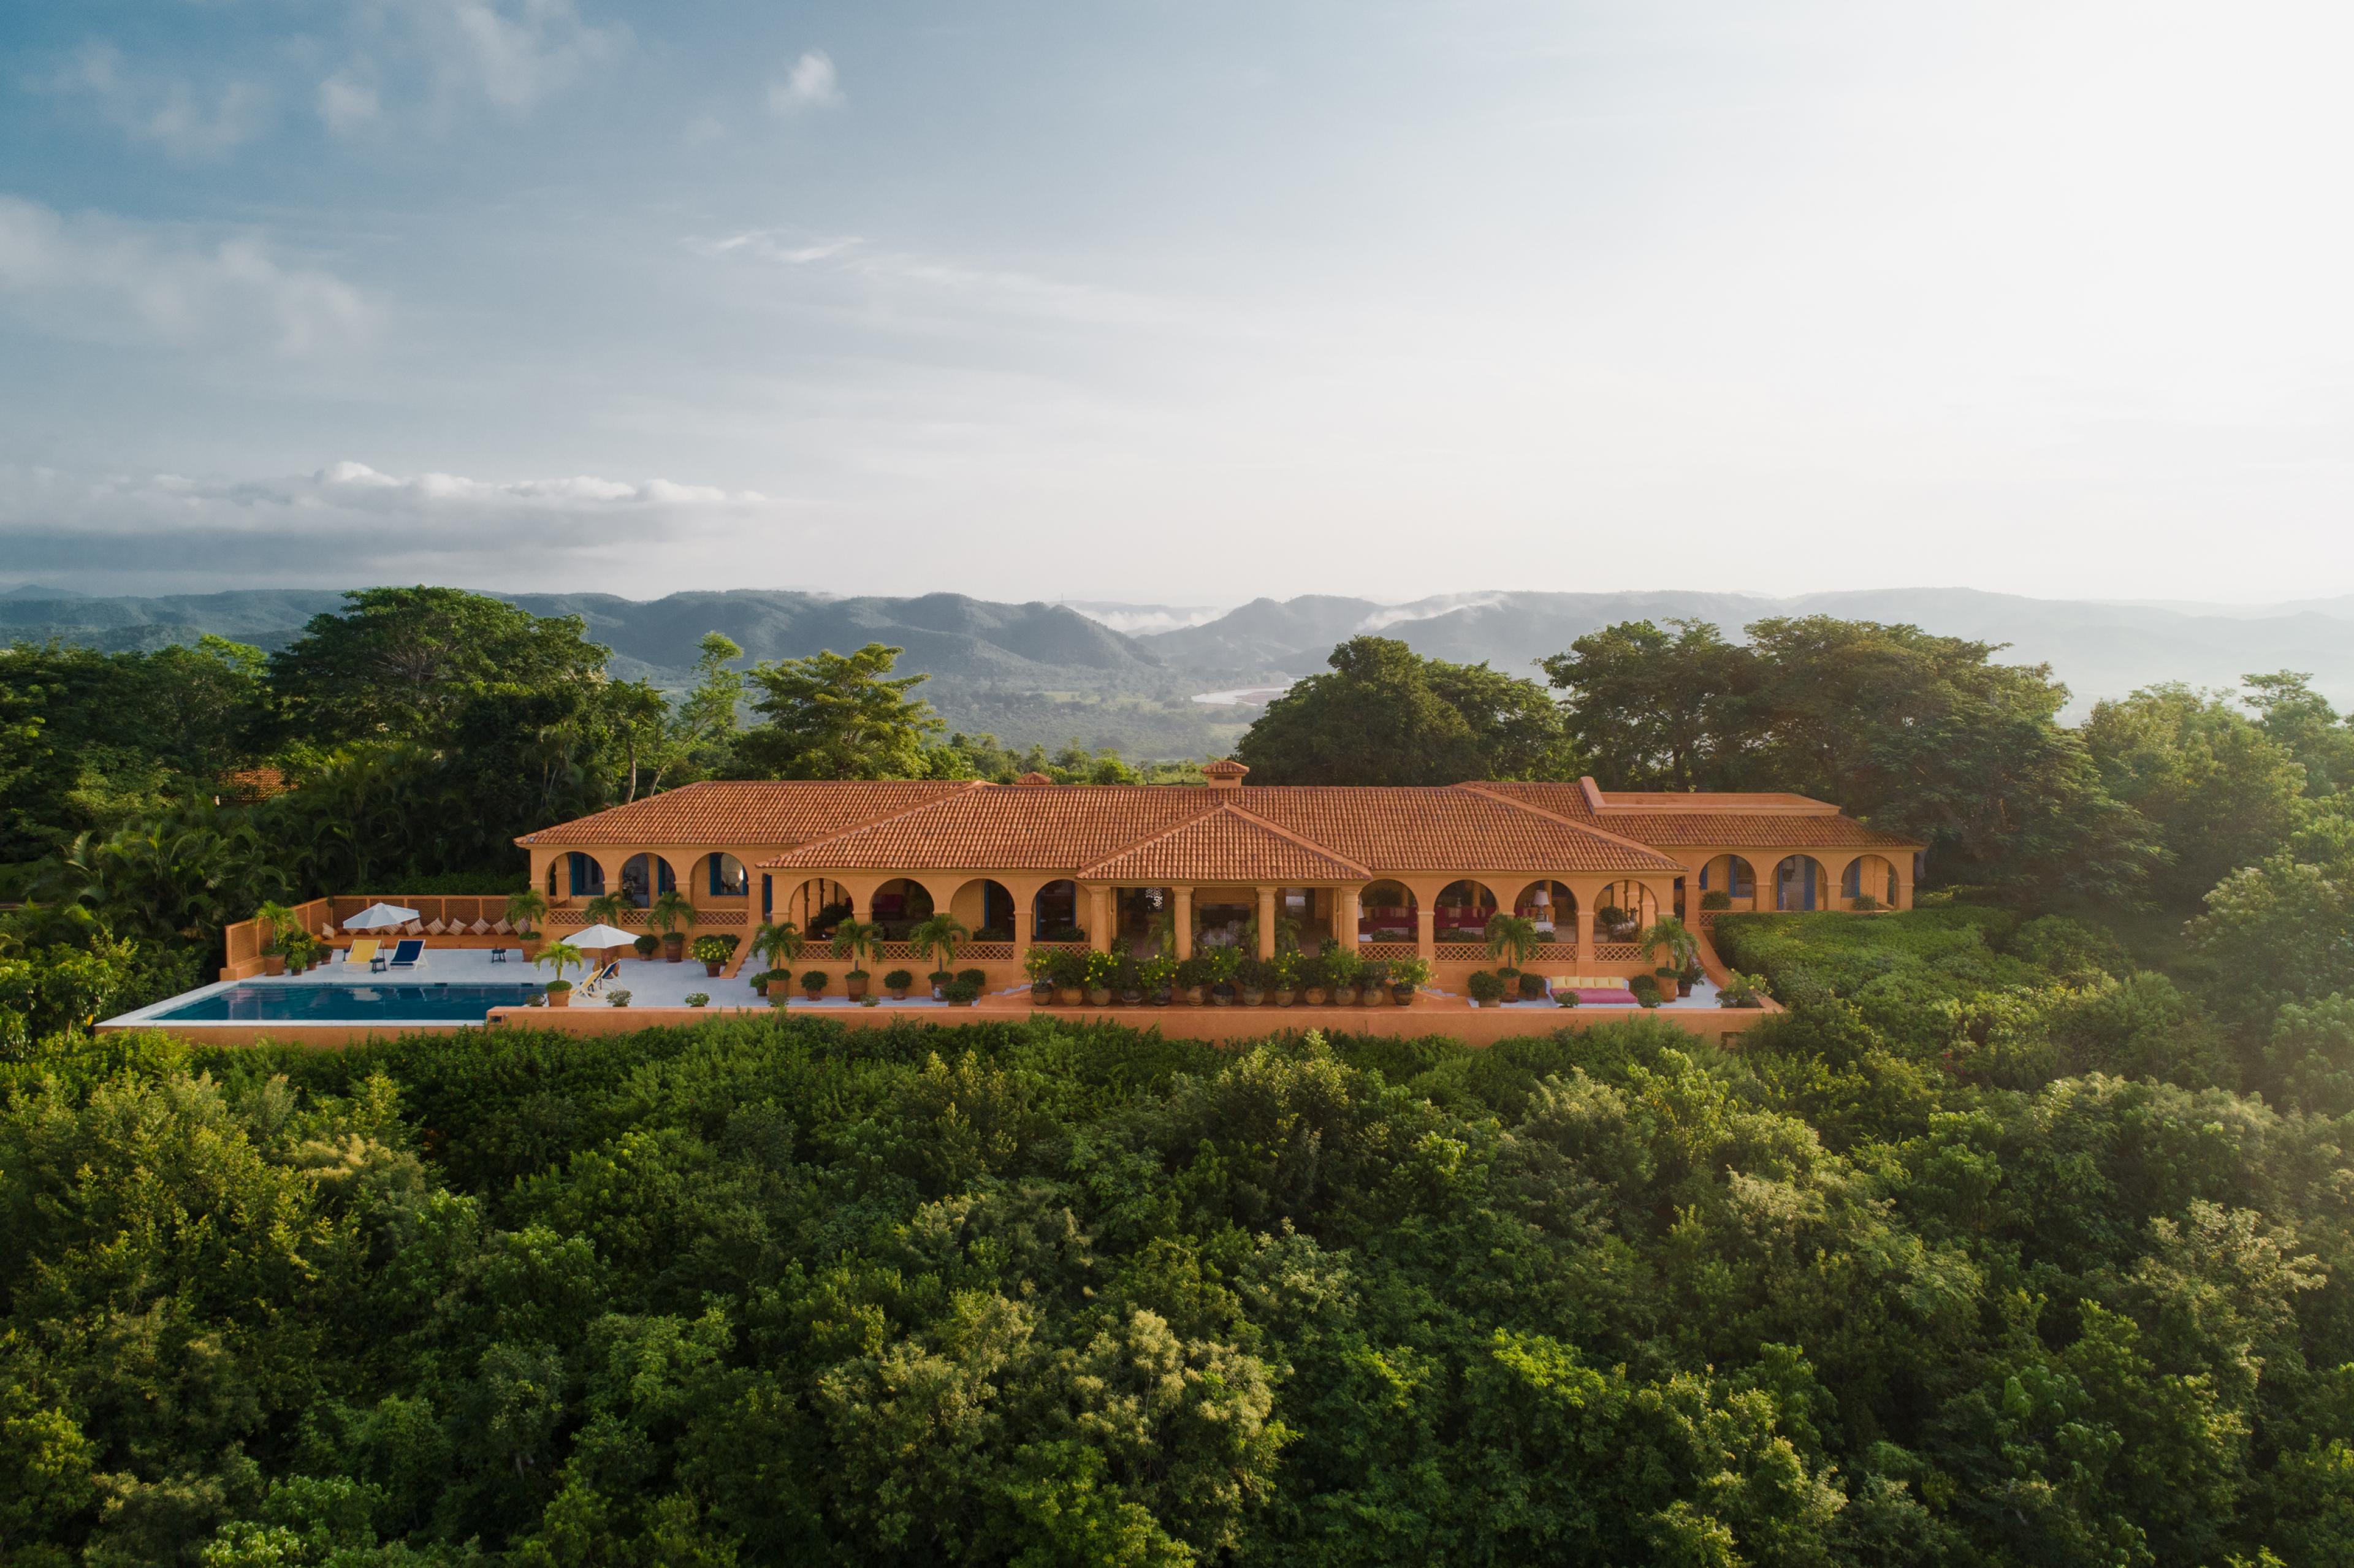 orange gold villa with arches and a pool on the deck up on a hilltop